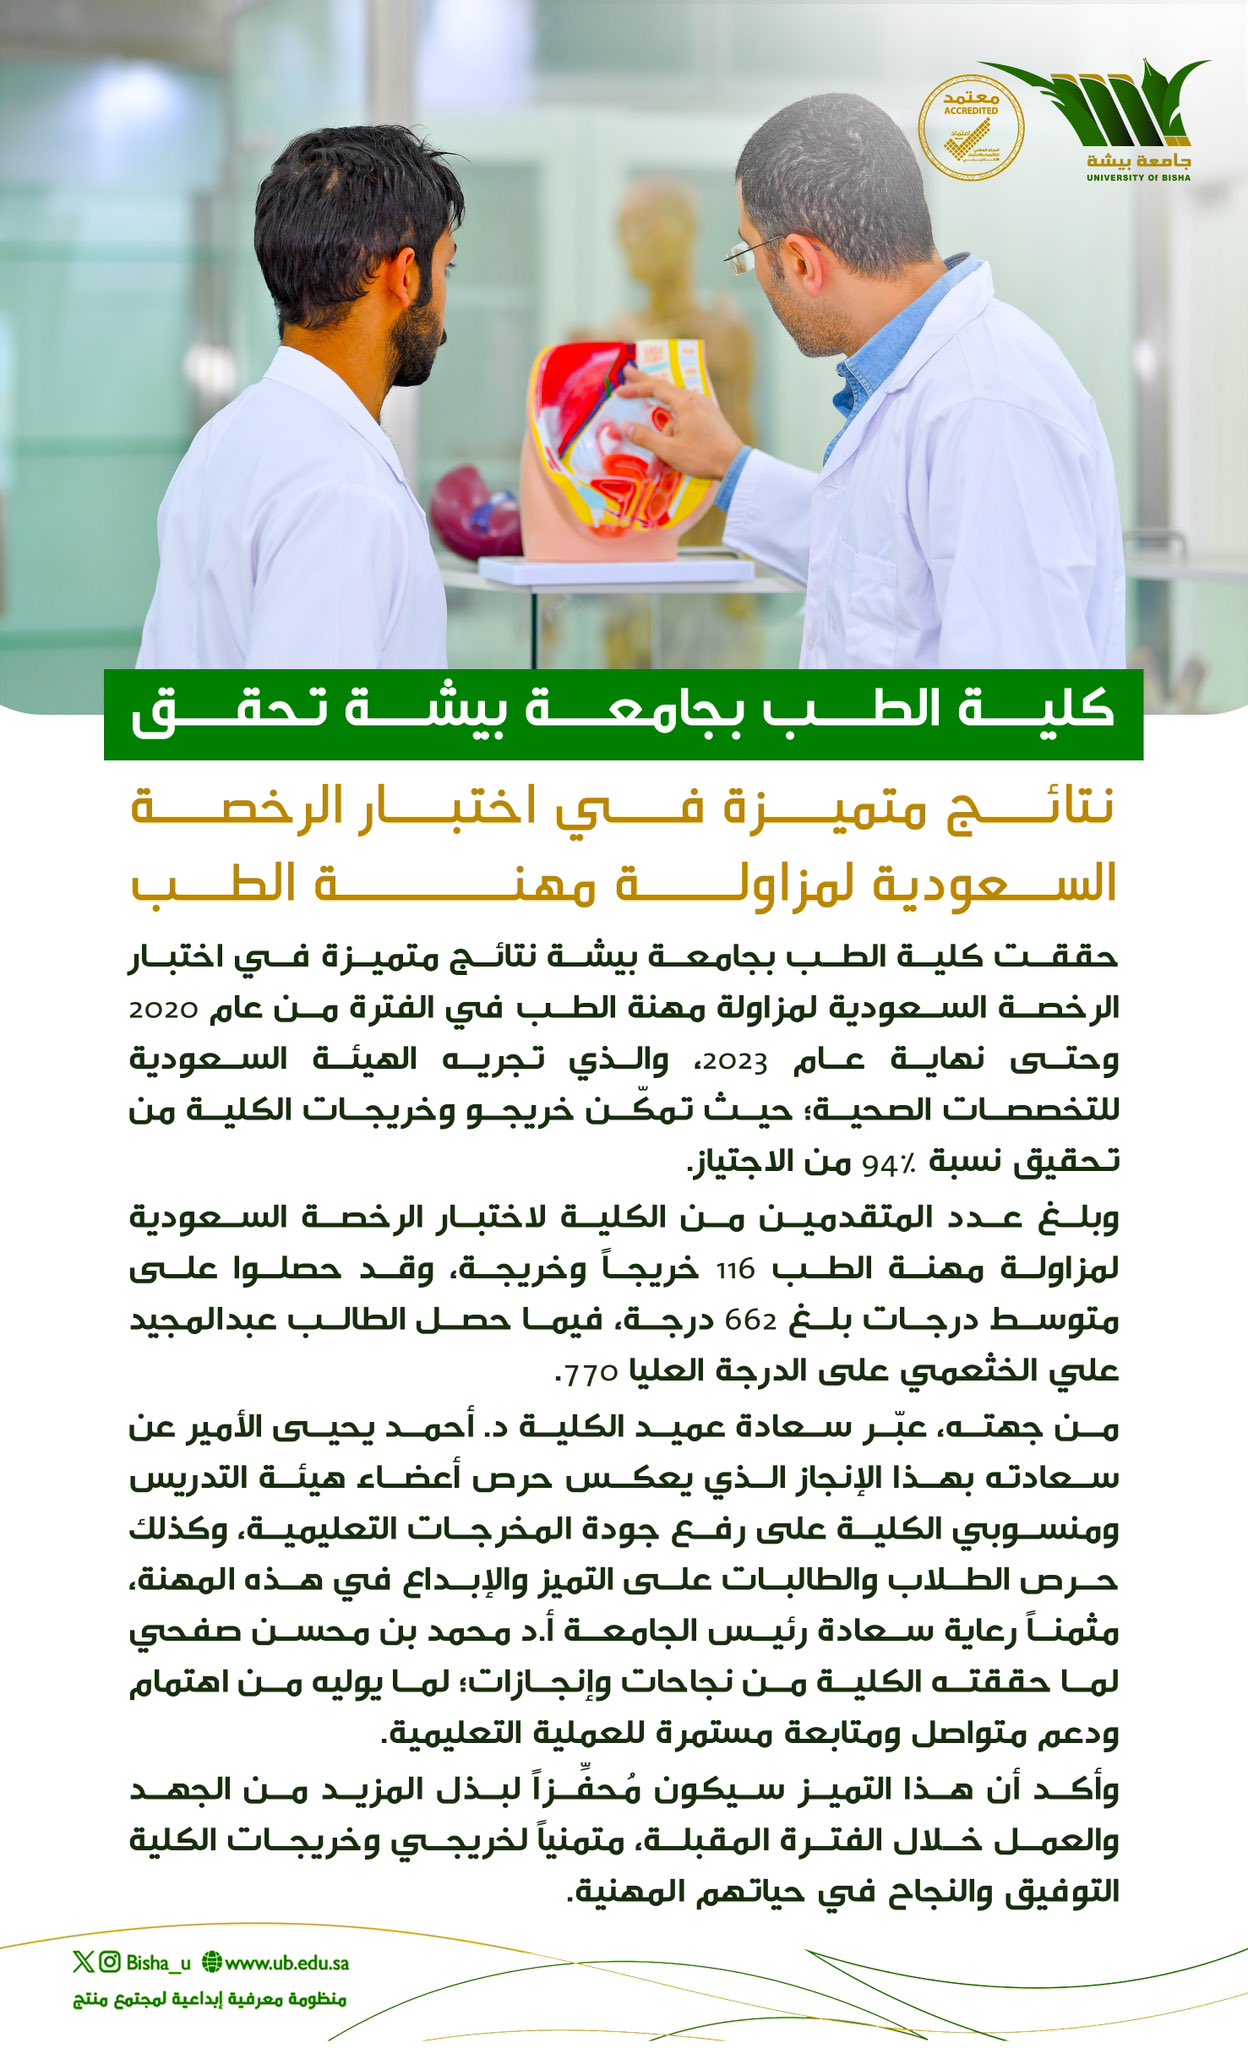 The College of Medicine achieves outstanding results in the Saudi license test to practice medicine